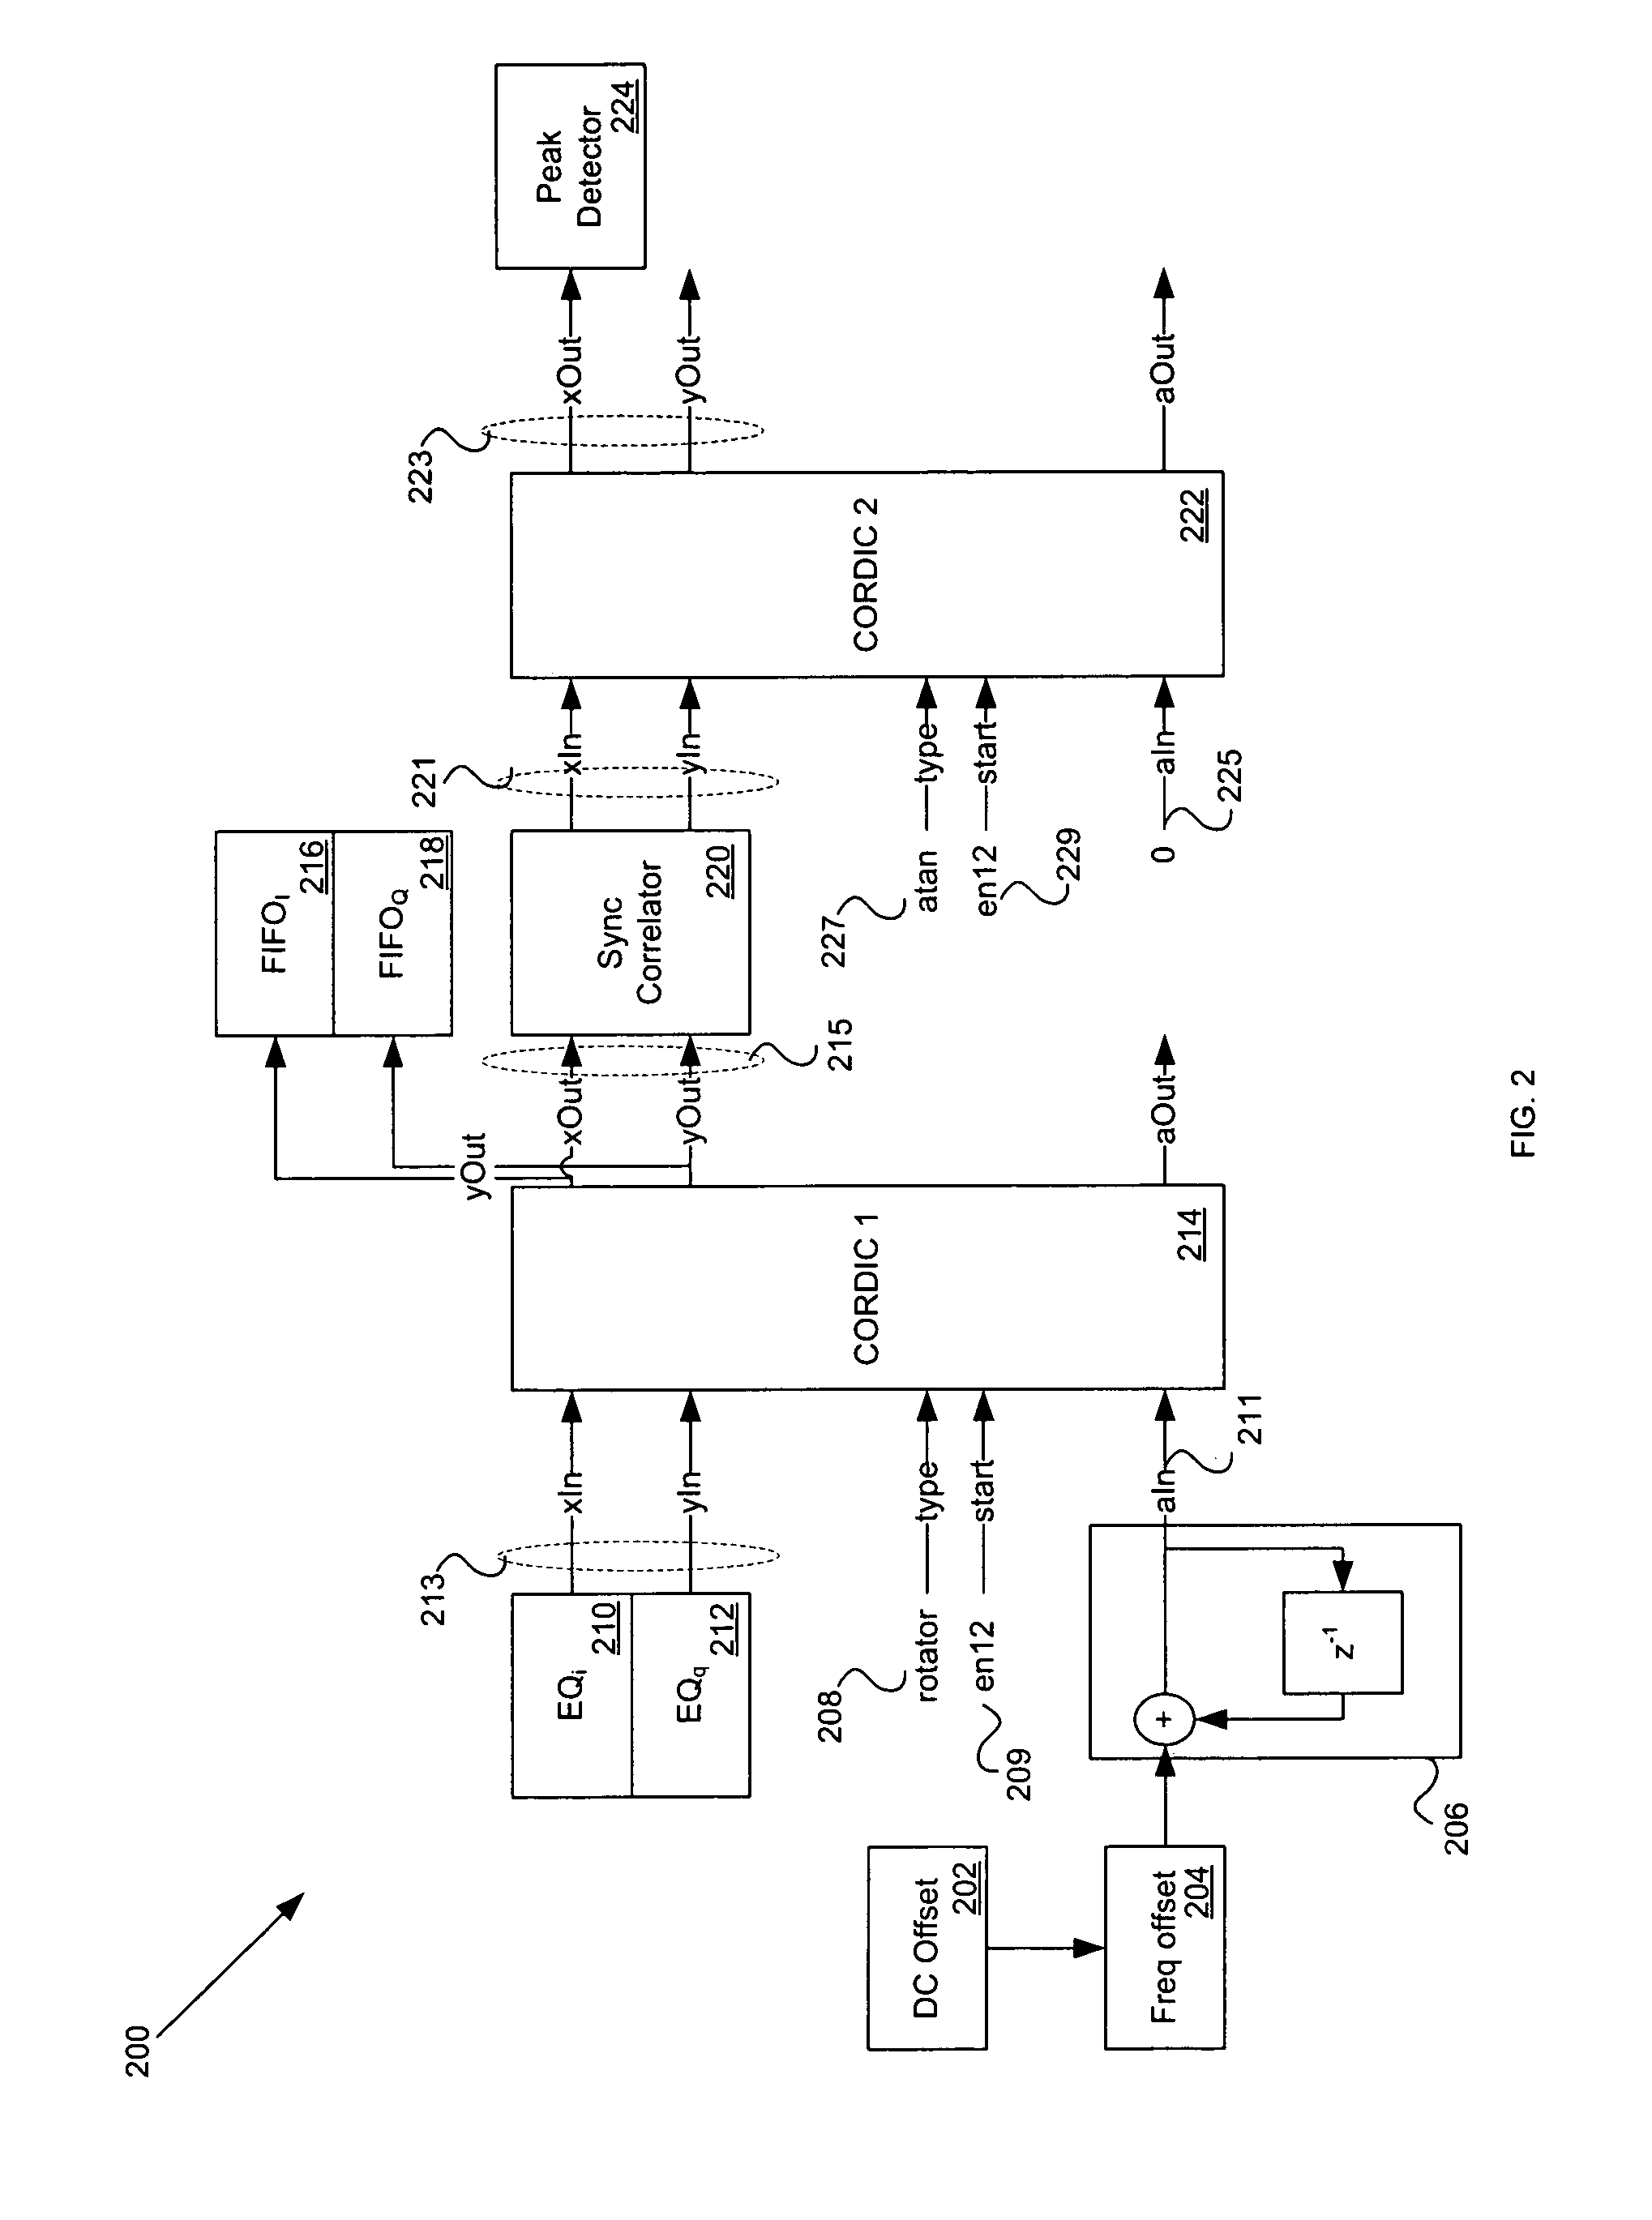 Method and system for reuse of CORDIC in an RF transceiver by reconfiguration in real time